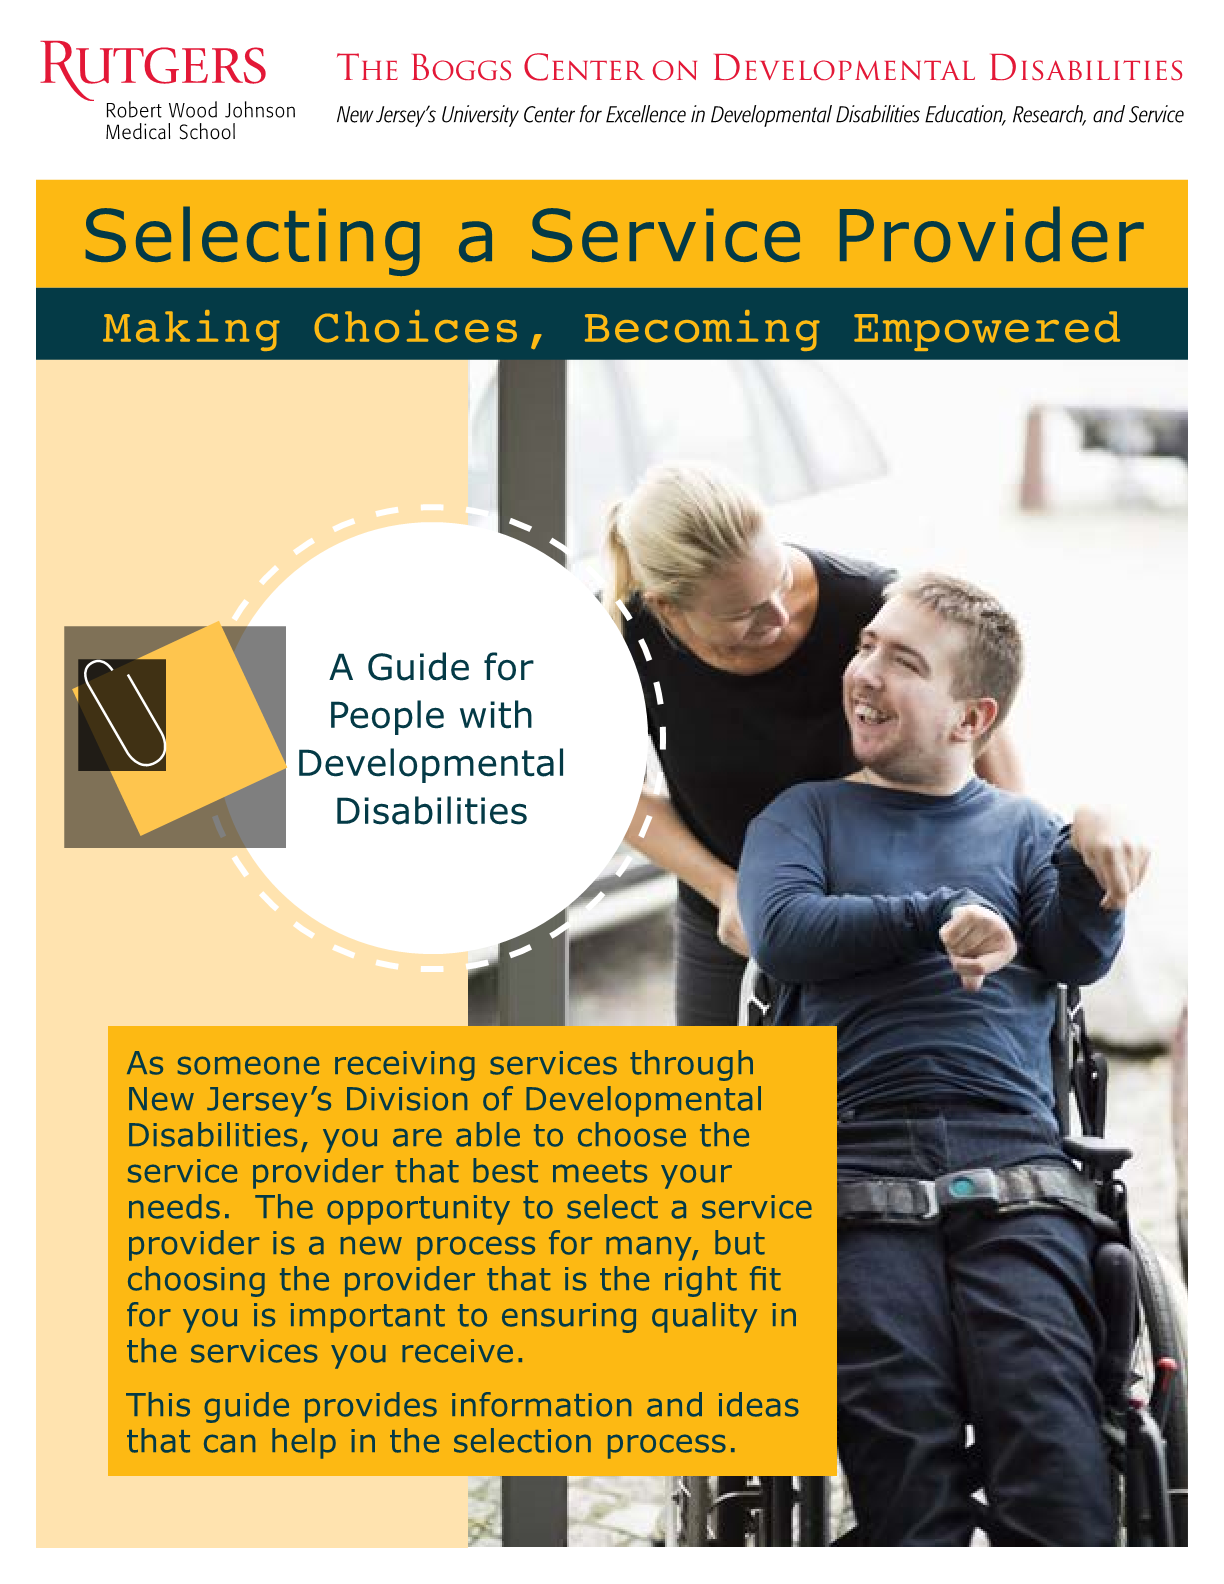 Selecting a Service Provider: Making Choices, Becoming Empowered